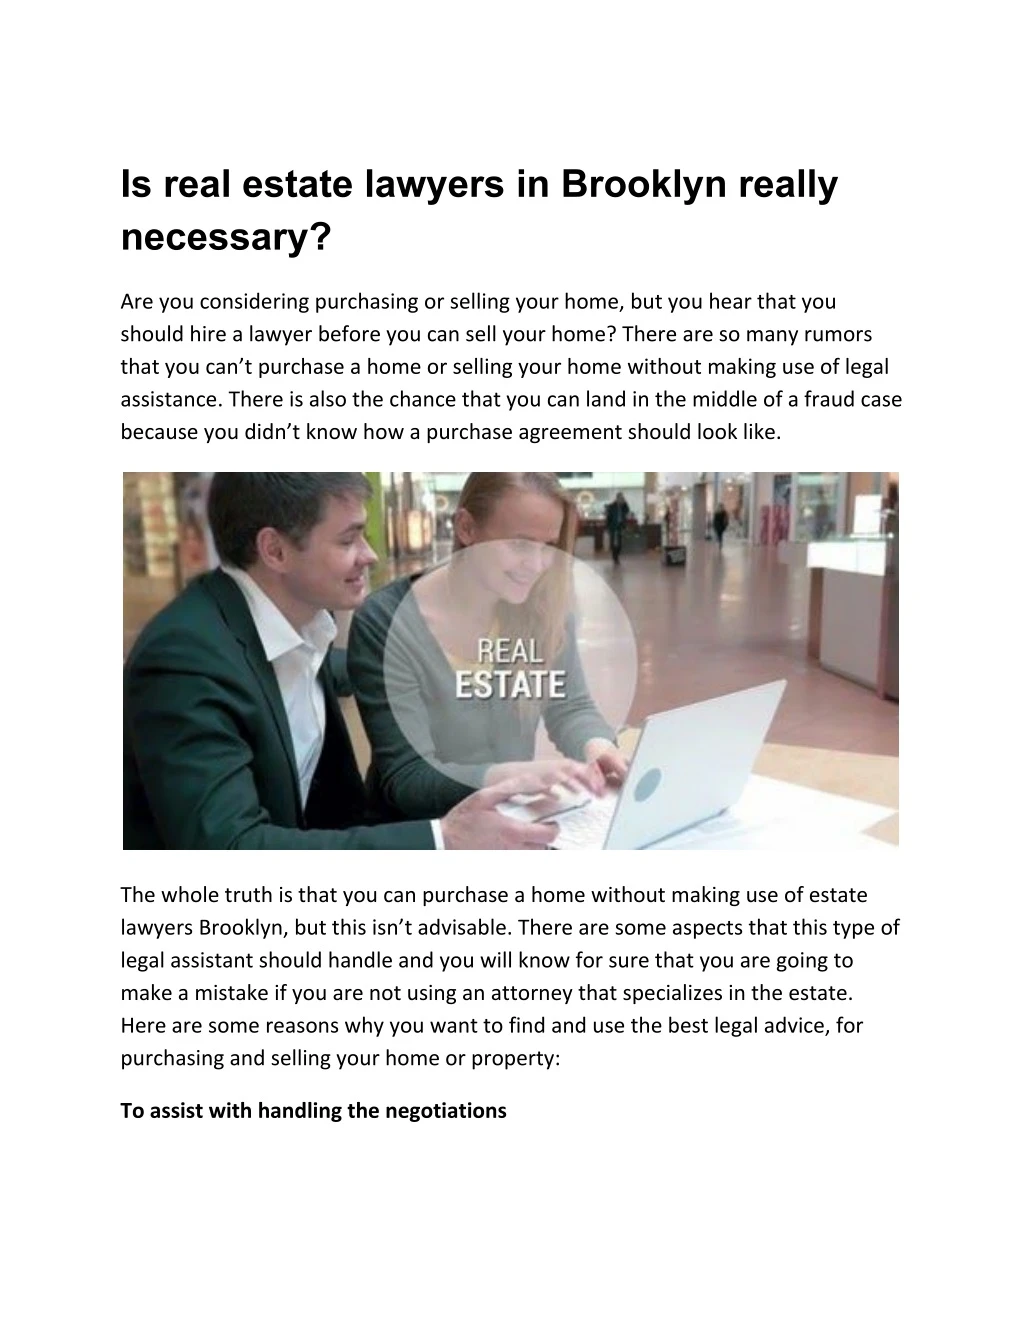 is real estate lawyers in brooklyn really